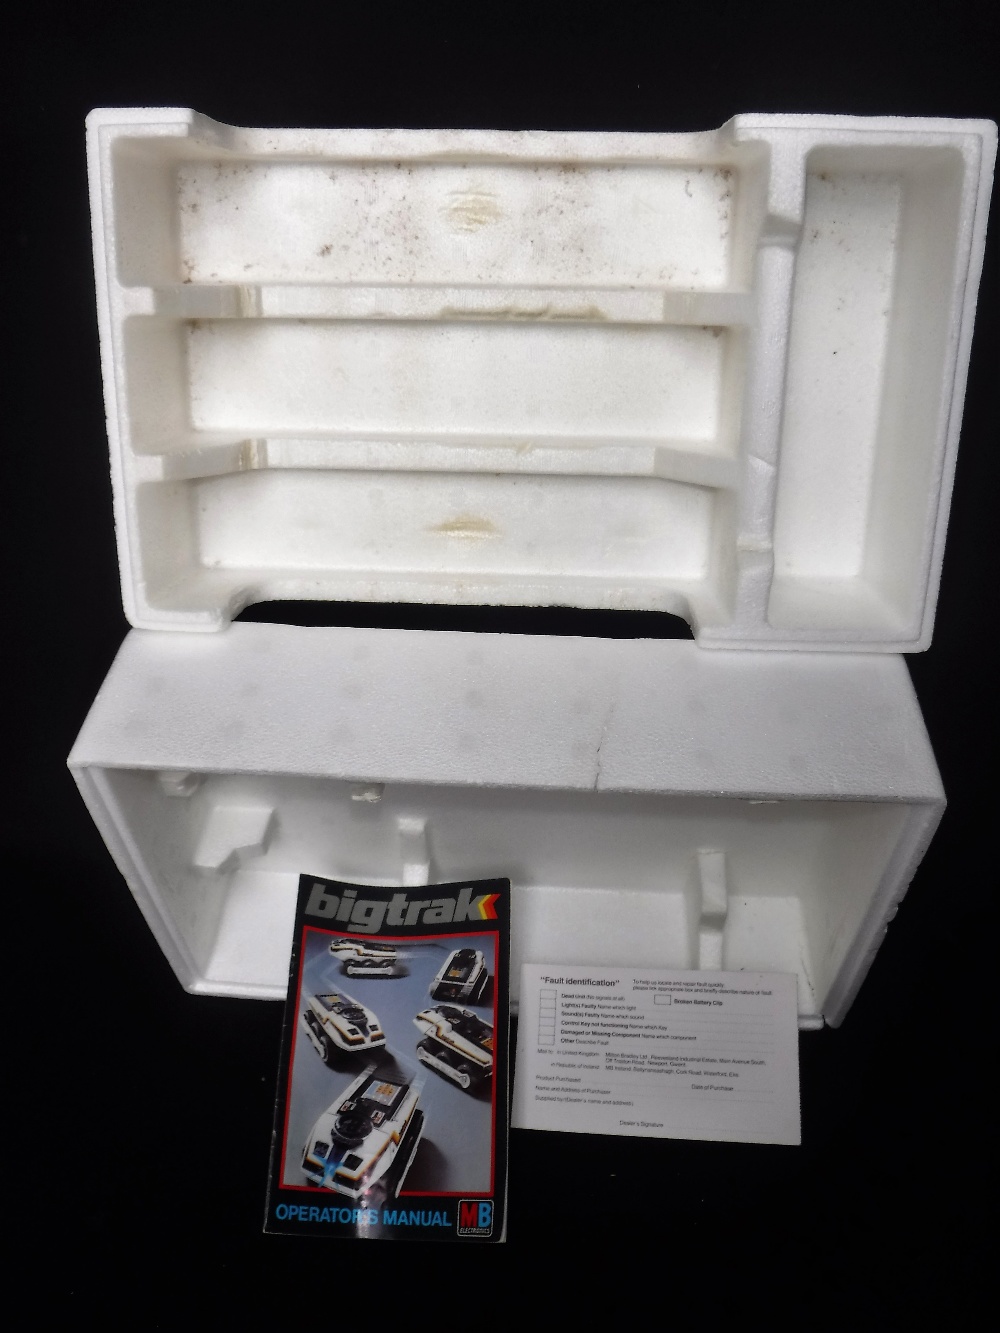 MB ELECTRONICS: A VINTAGE 'BIGTRACK' COMPUTER ACTIVATED VEHICLE (boxed with polystyrene packing - Image 3 of 3